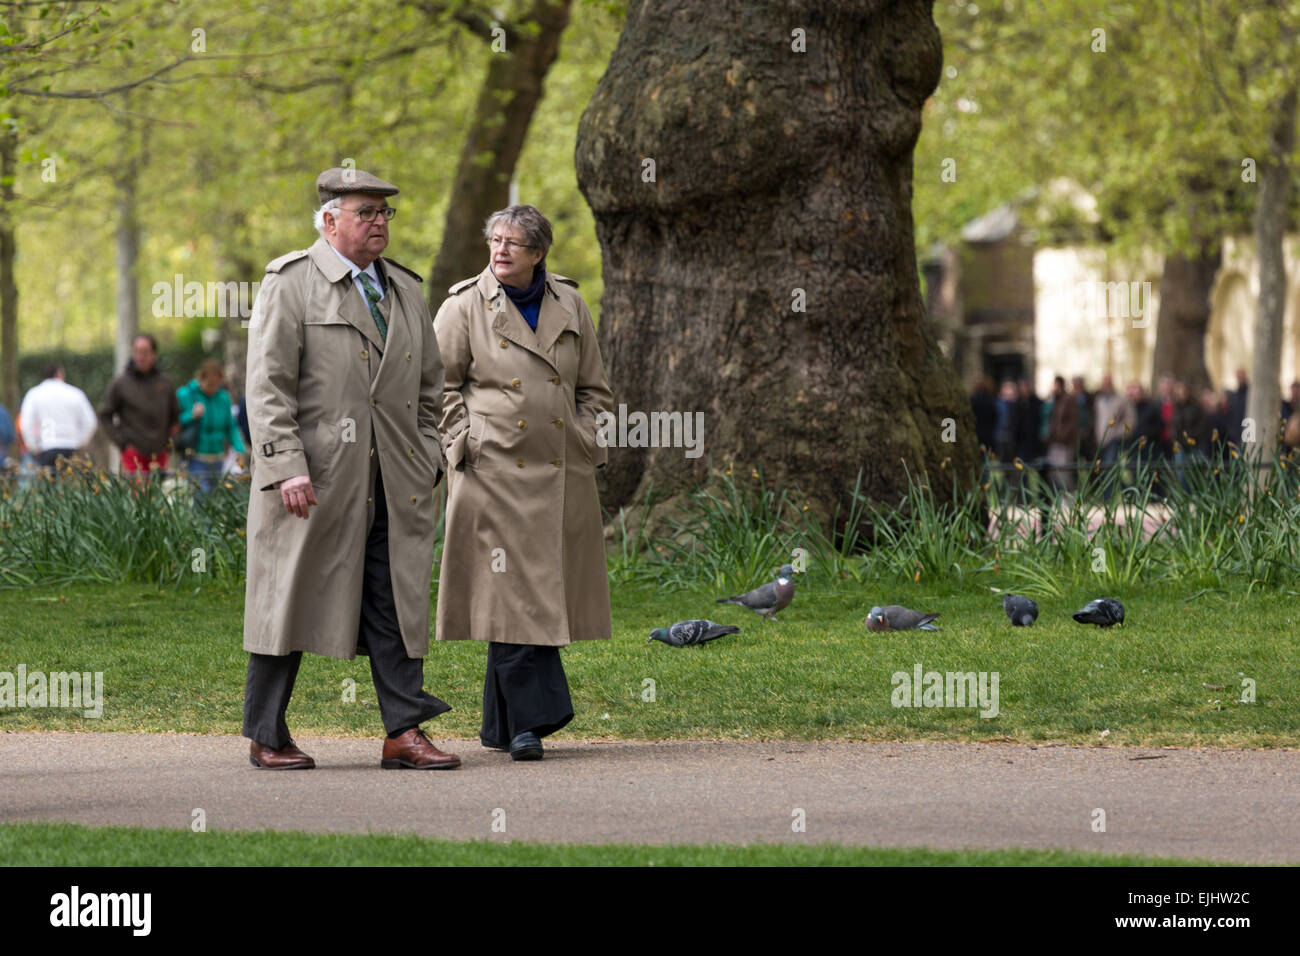 Senior man and woman strolling in St. James's Park in smart raincoats, London, England Stock Photo